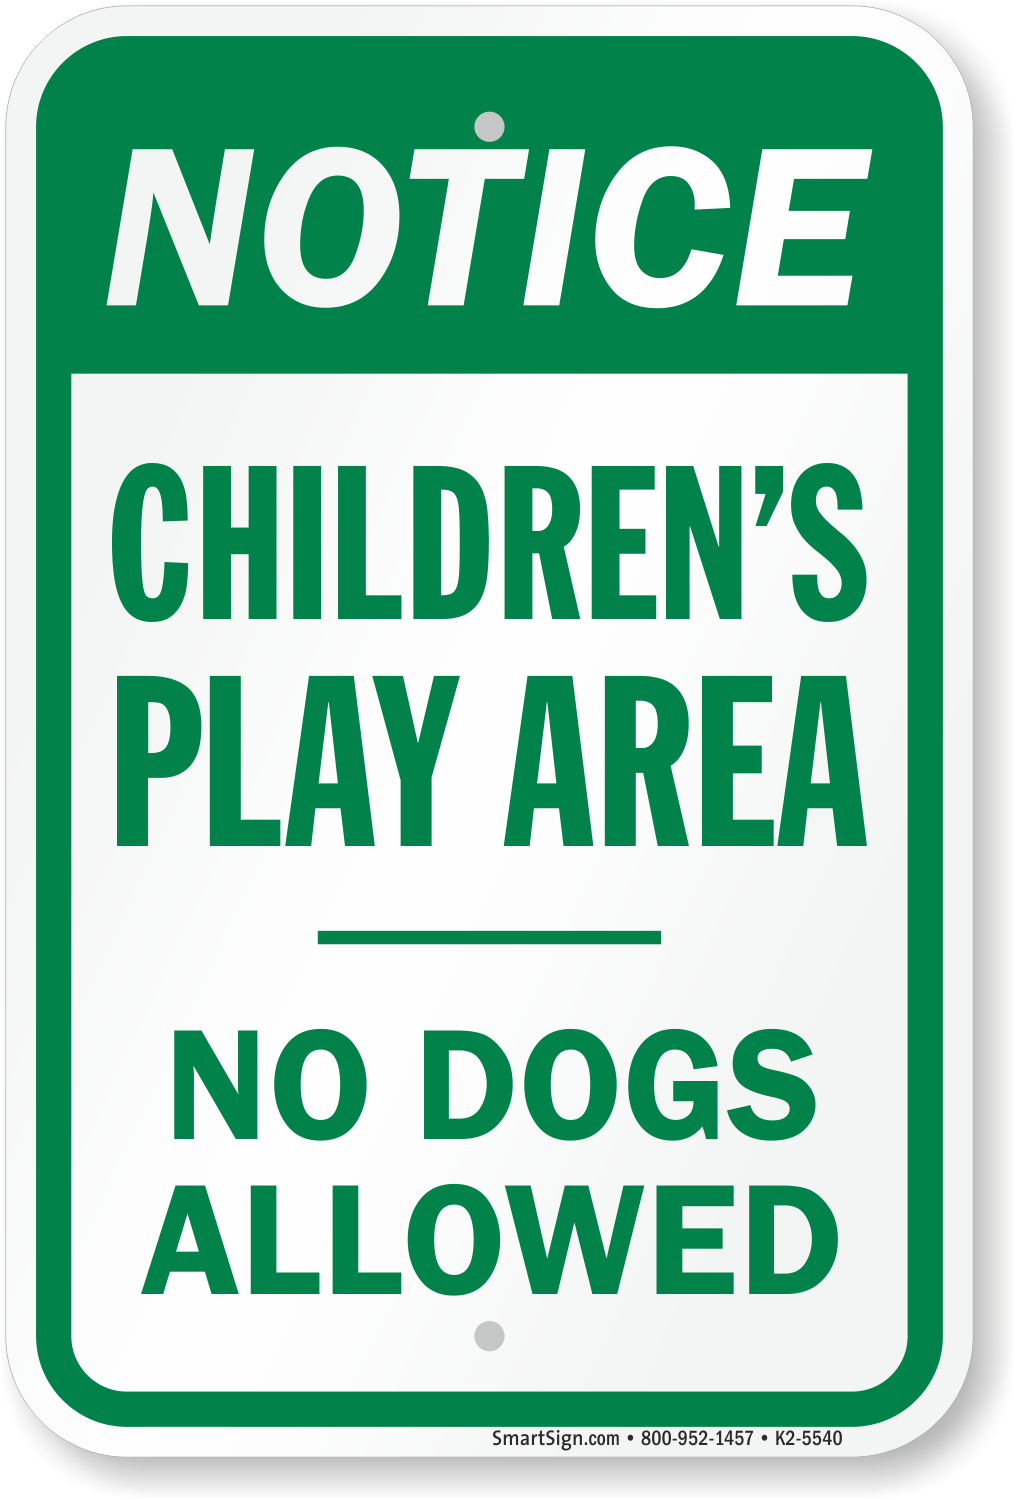 Childrens play area no dogs allowed safety sign 